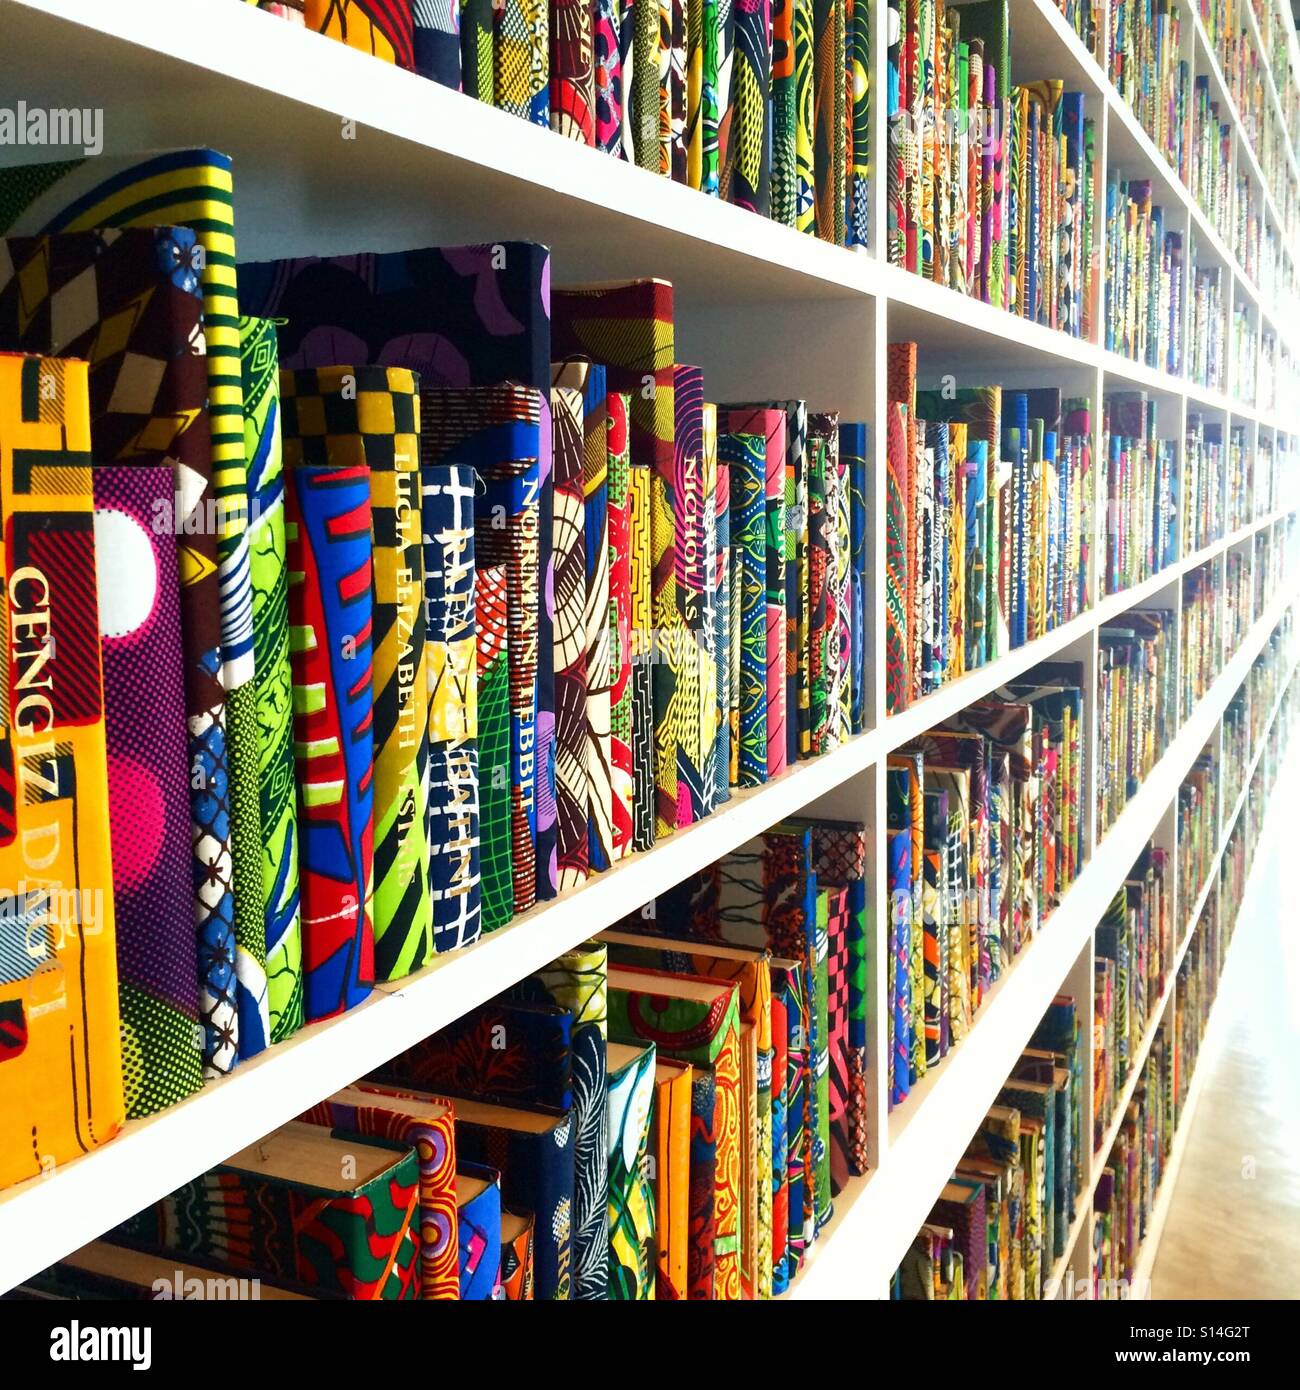 The British Library  a colourful book shelves installation artwork by Yinka Shonibare at the Turner Contemporary gallery in Margate England 2016 Stock Photo